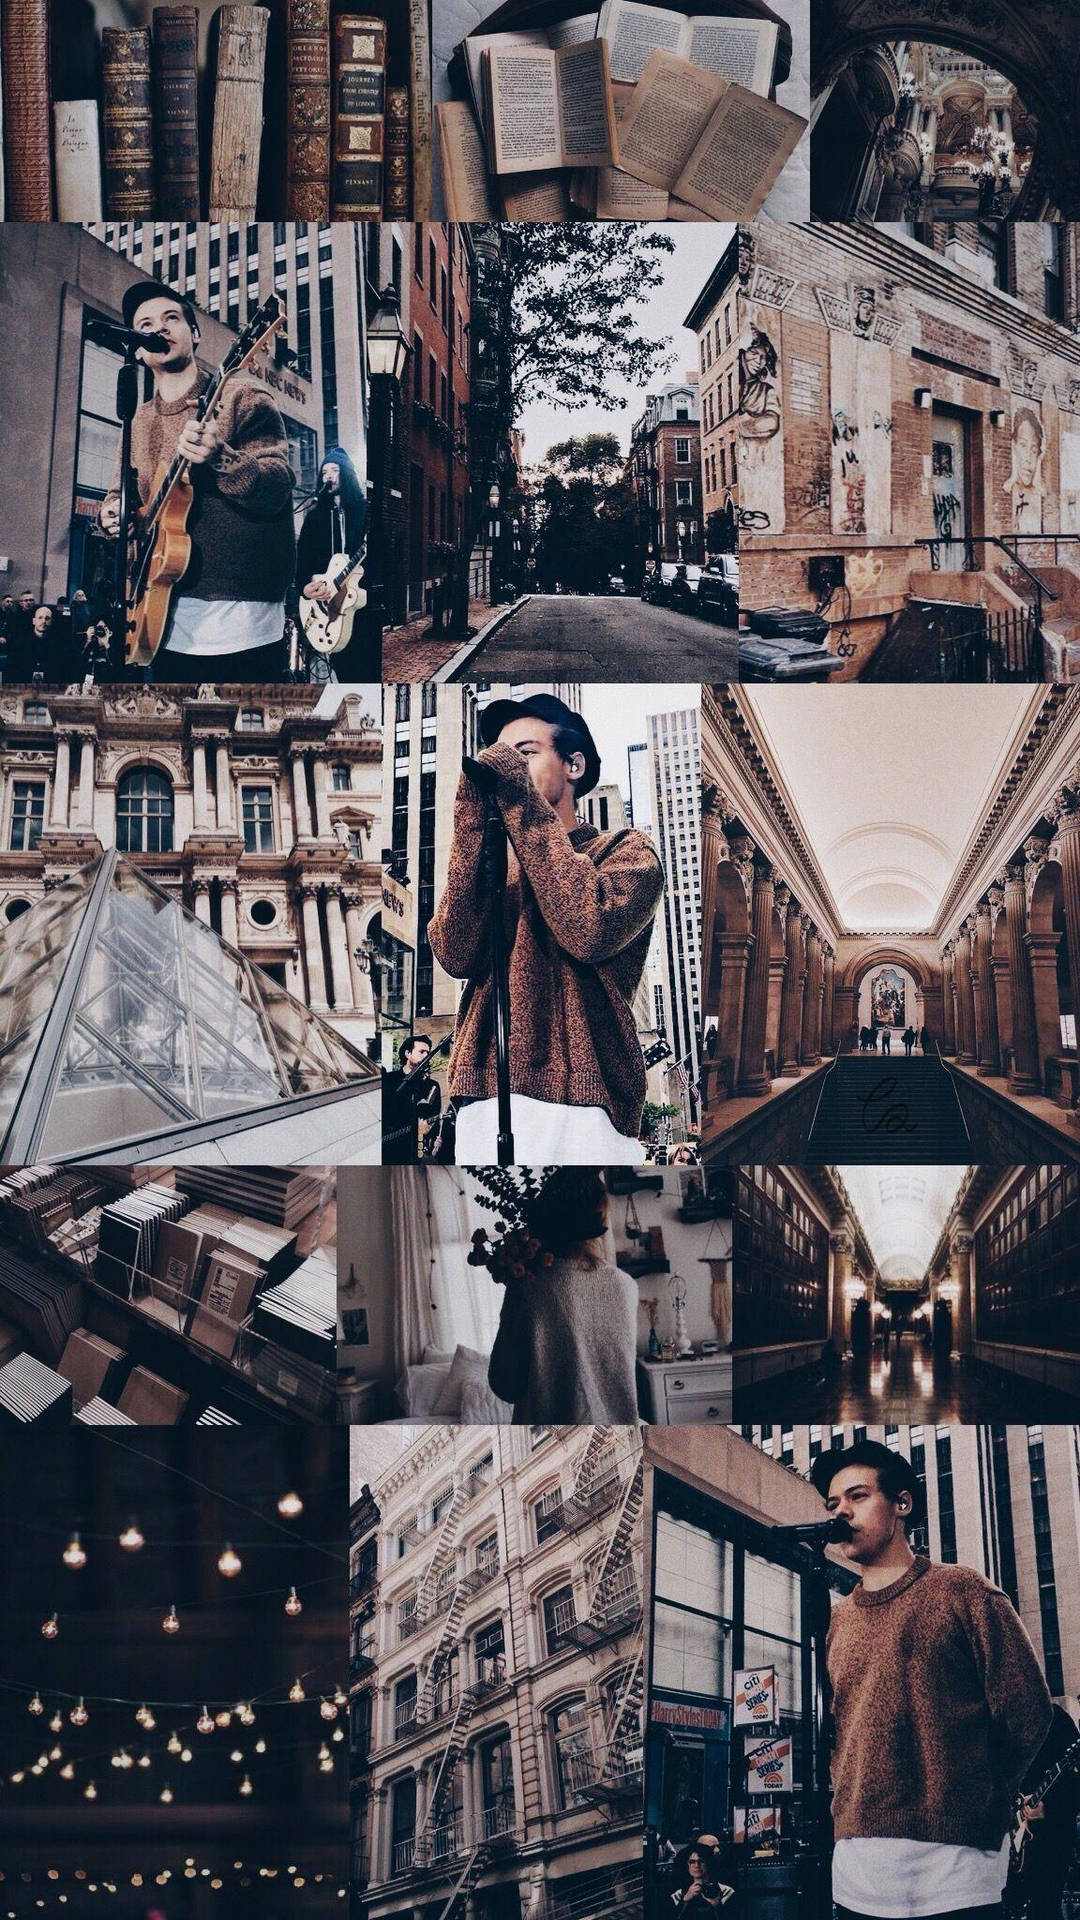 Aesthetic collage of the Harry Potter series, with a man holding an umbrella and a book. - Harry Styles